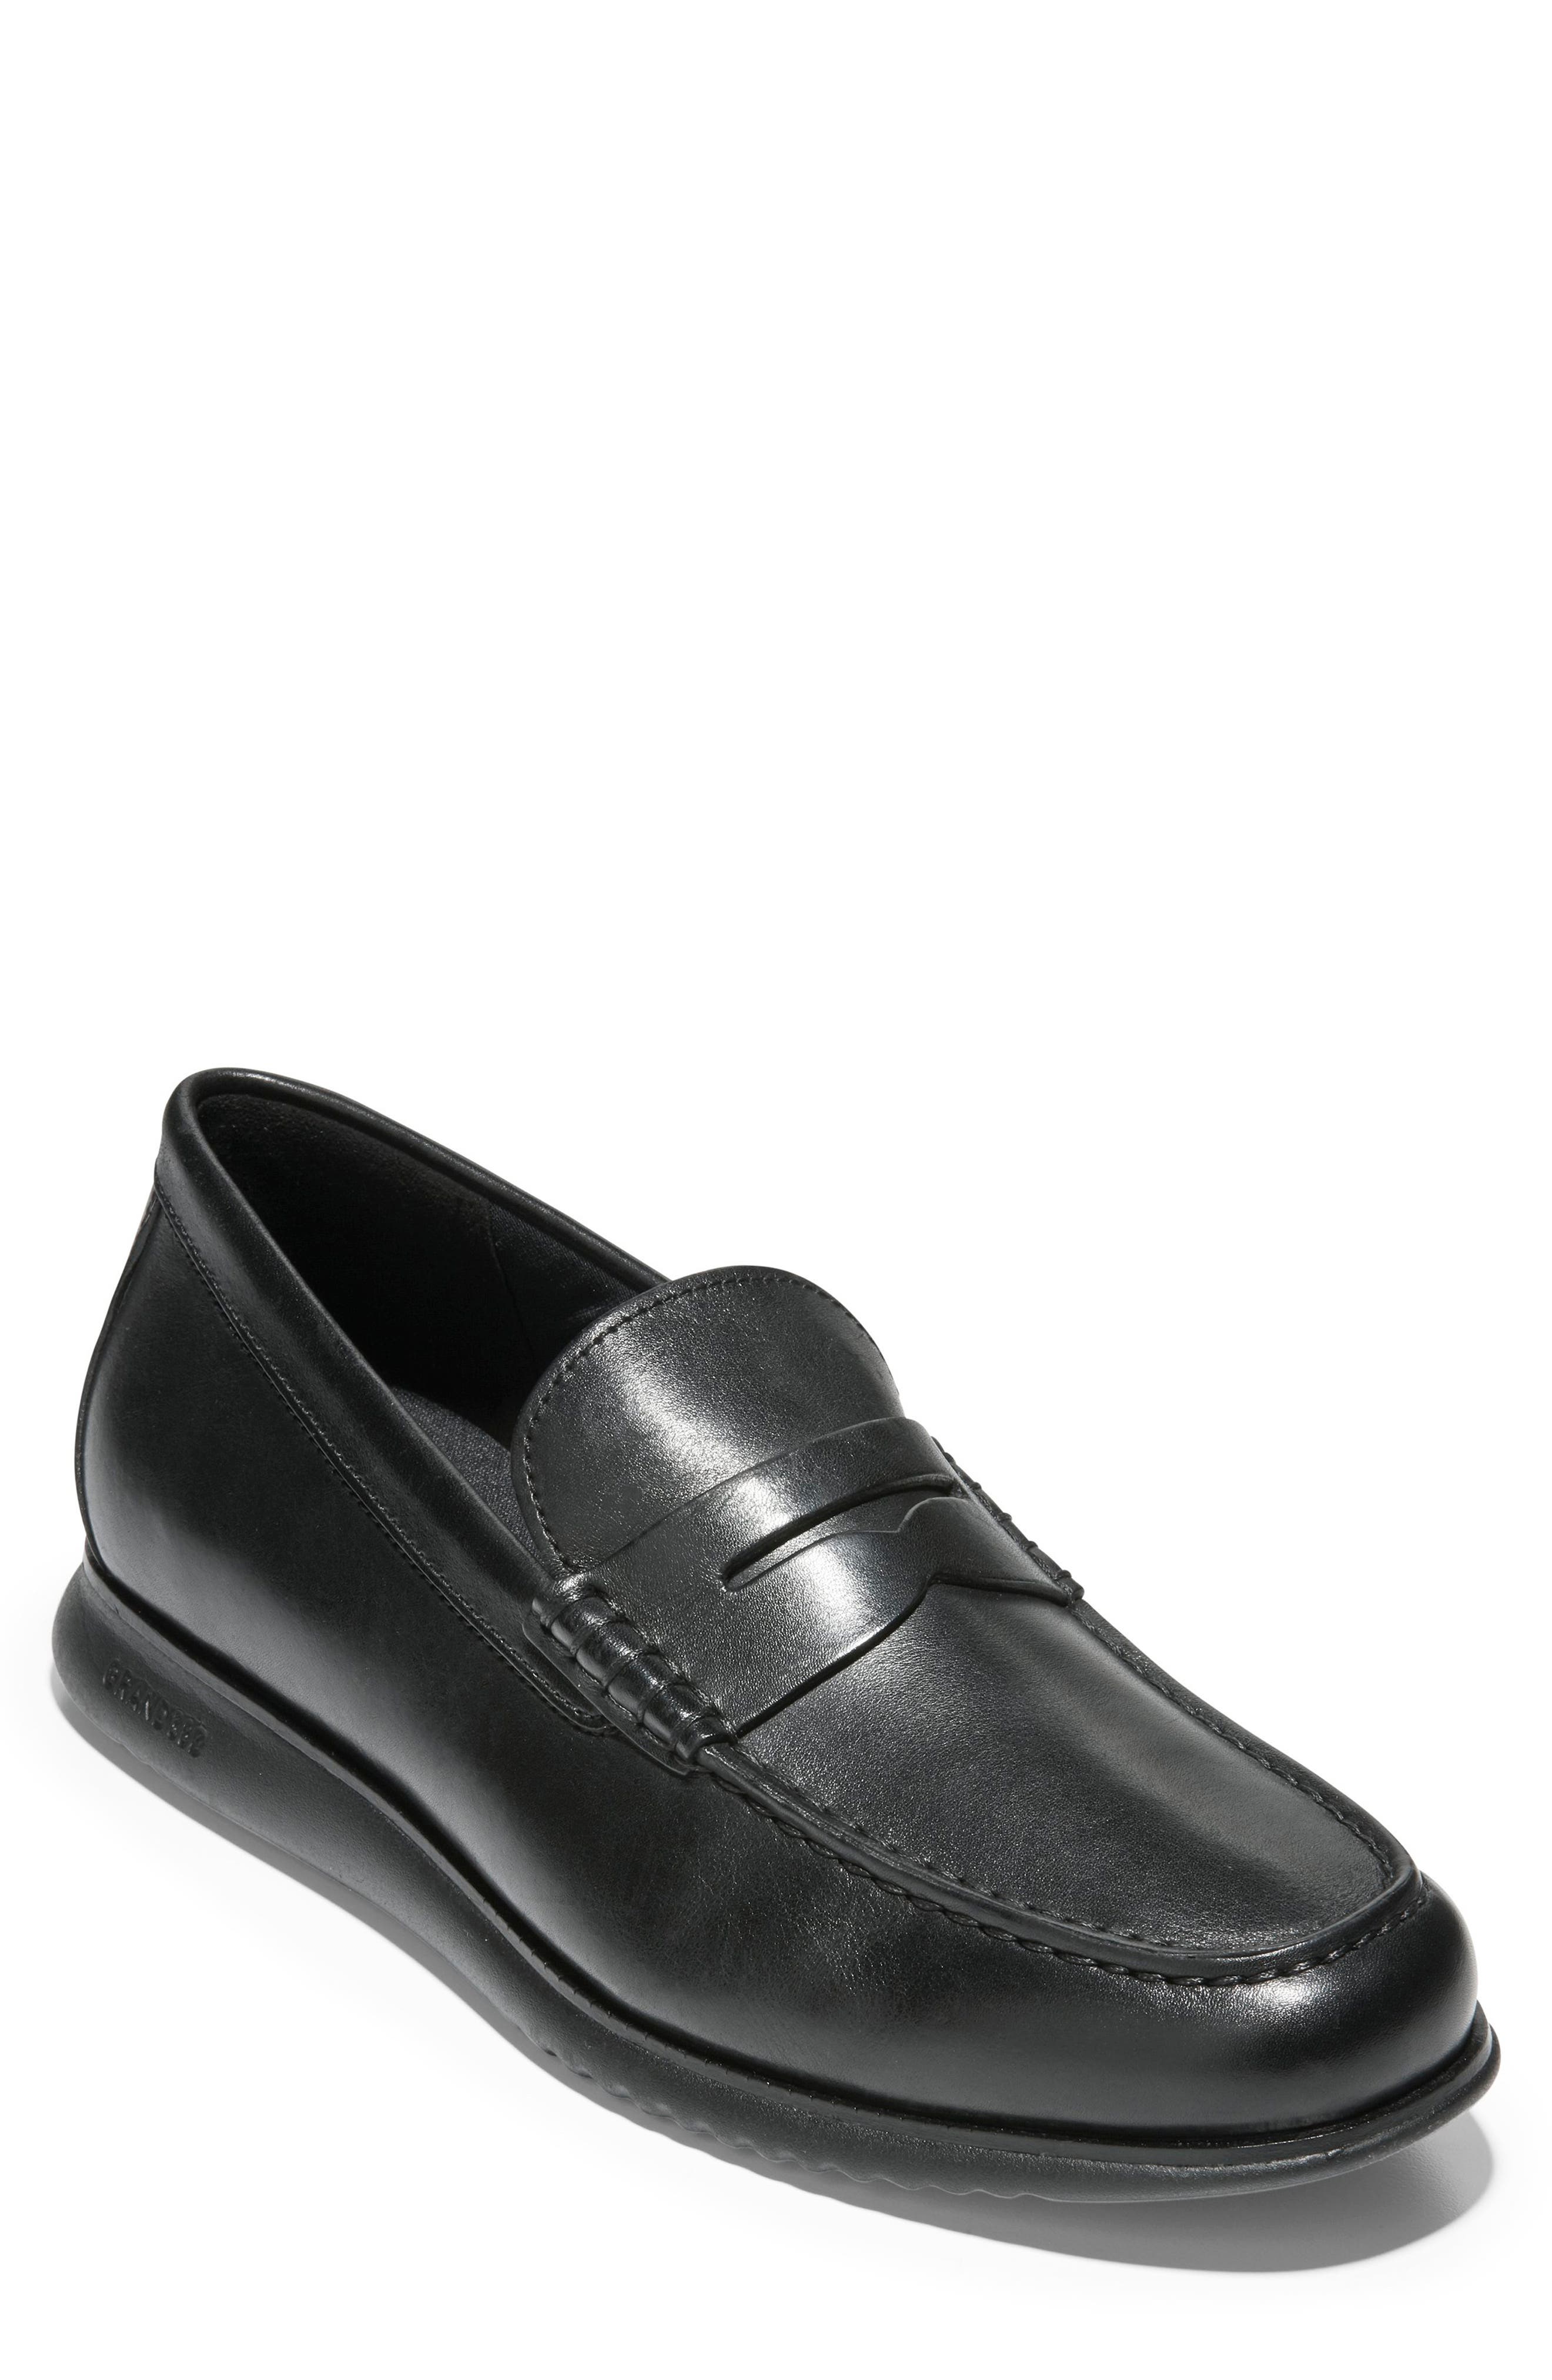 COLE HAAN 2.ZEROGRAND PENNY LOAFER,194736318611